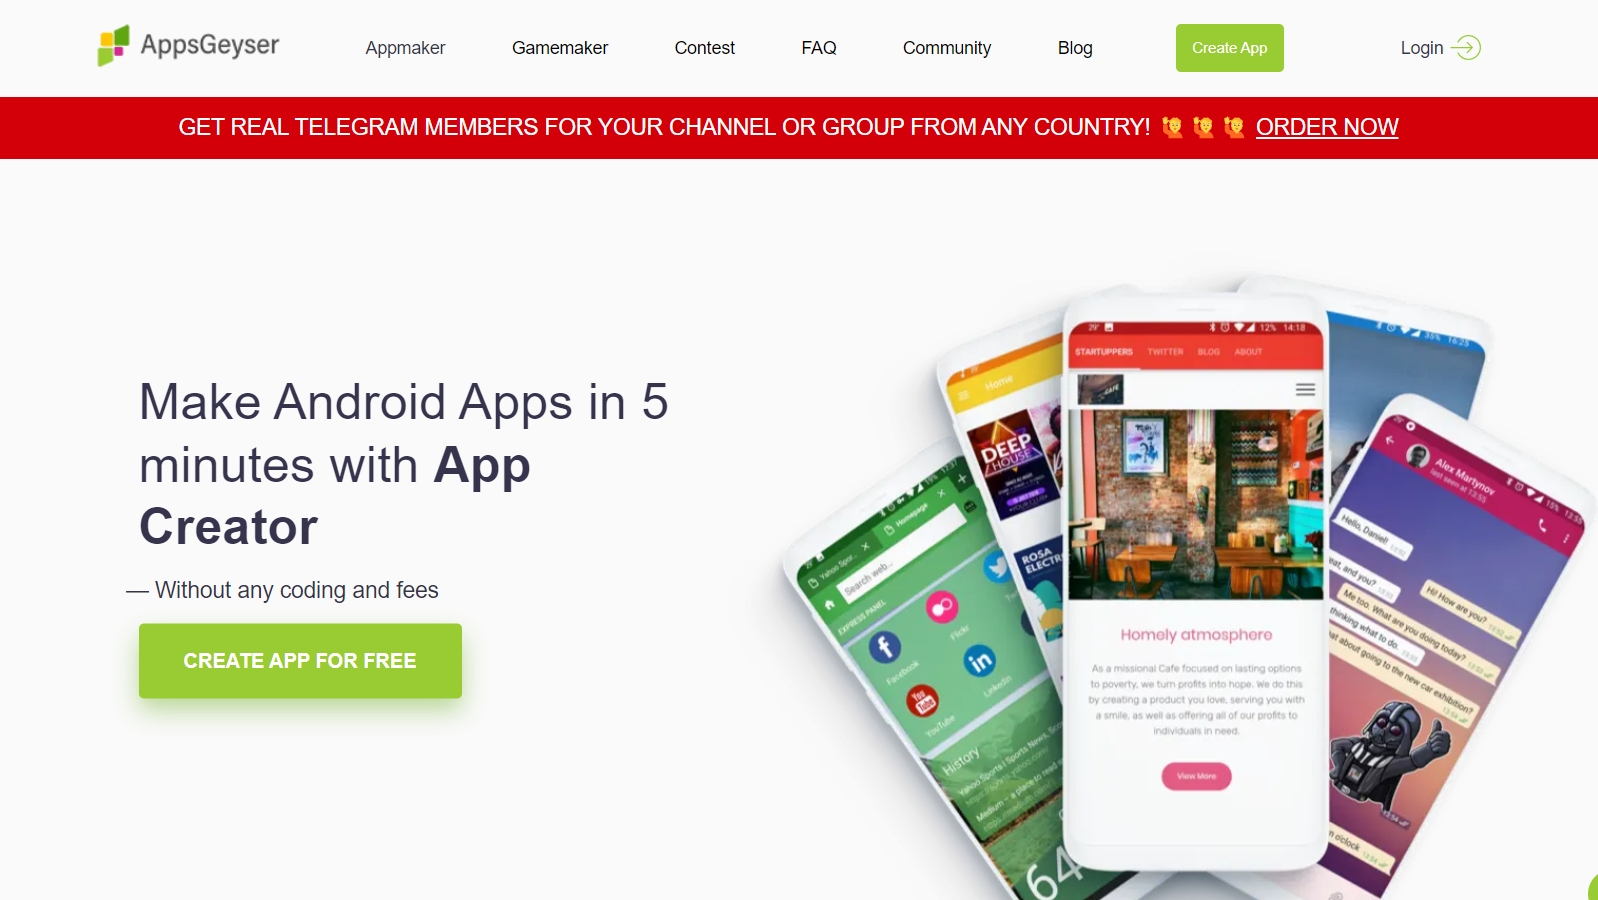 Make Android Apps in 5 minutes with App Creator